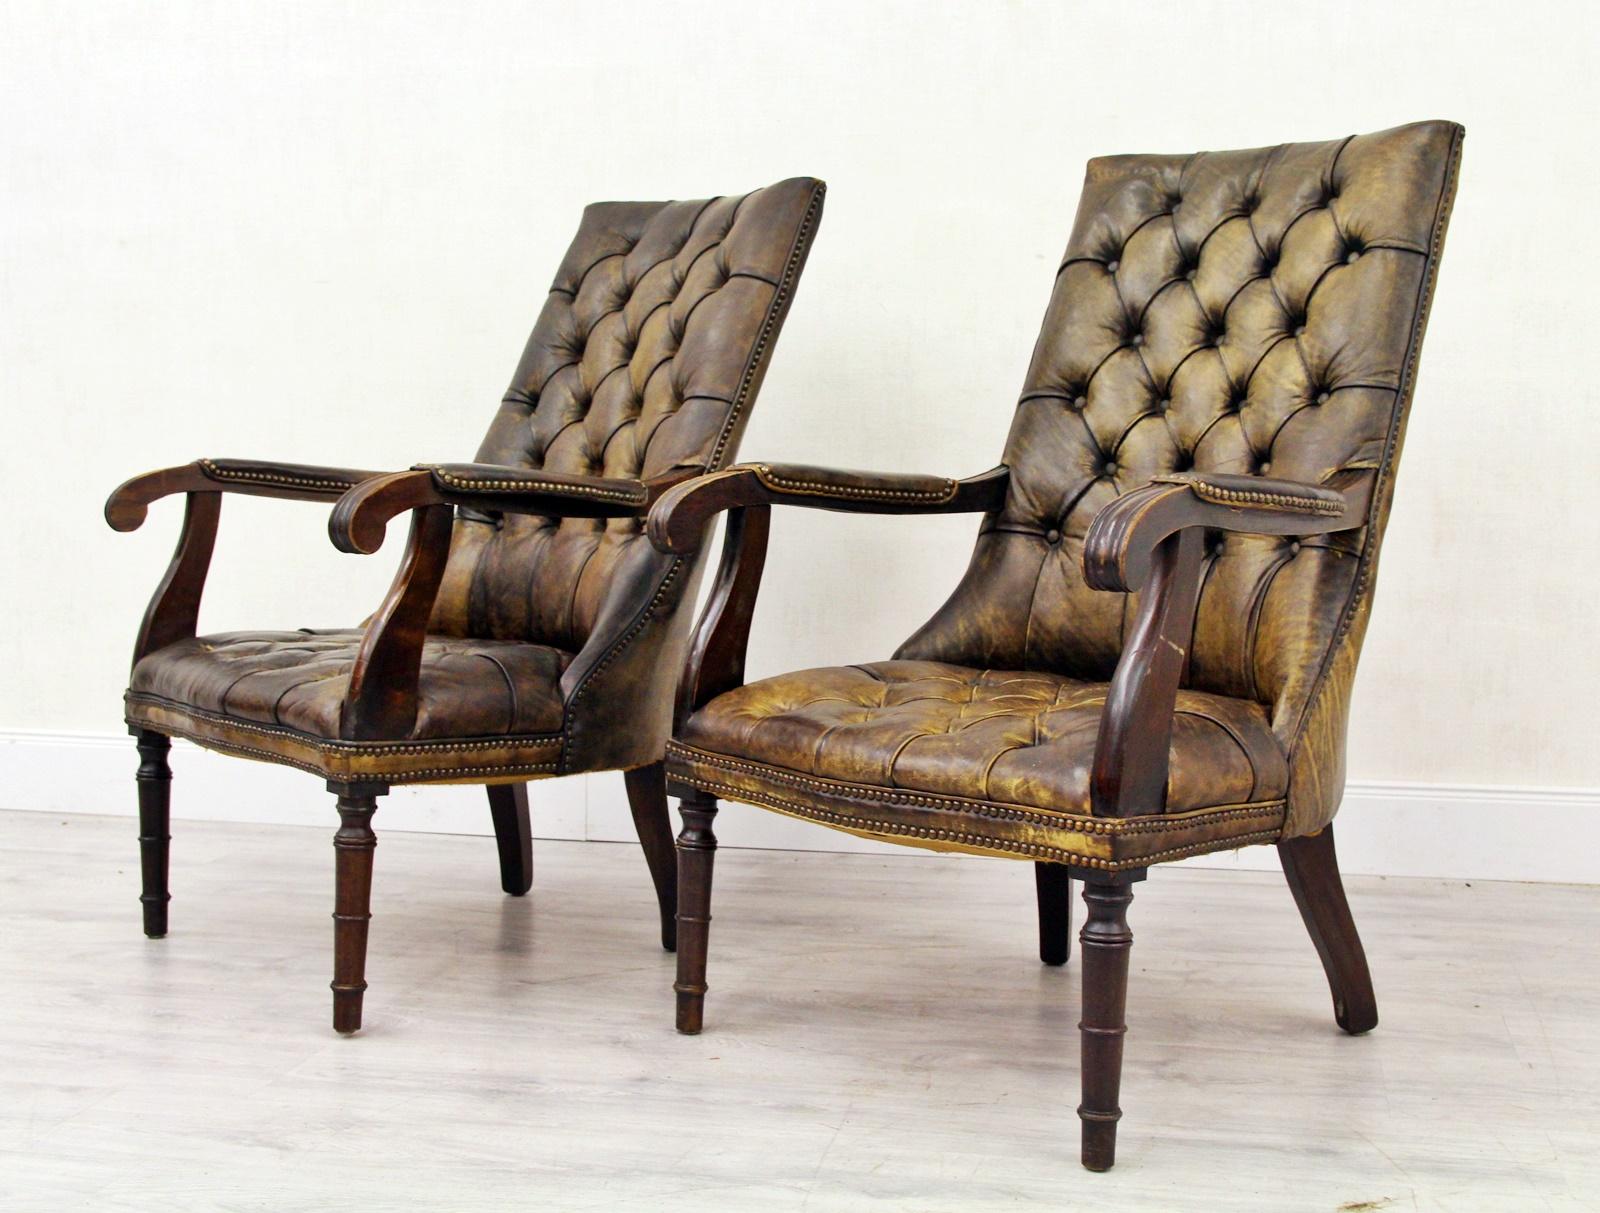 2 Chesterfield armchairs (rare about 100 years old)
The shape and the age is very rare and special
wing chairs
Height x 105 cm width x 70 cm depth x 80 cm
Condition: The armchairs are in a very good condition for the age and still have the charm